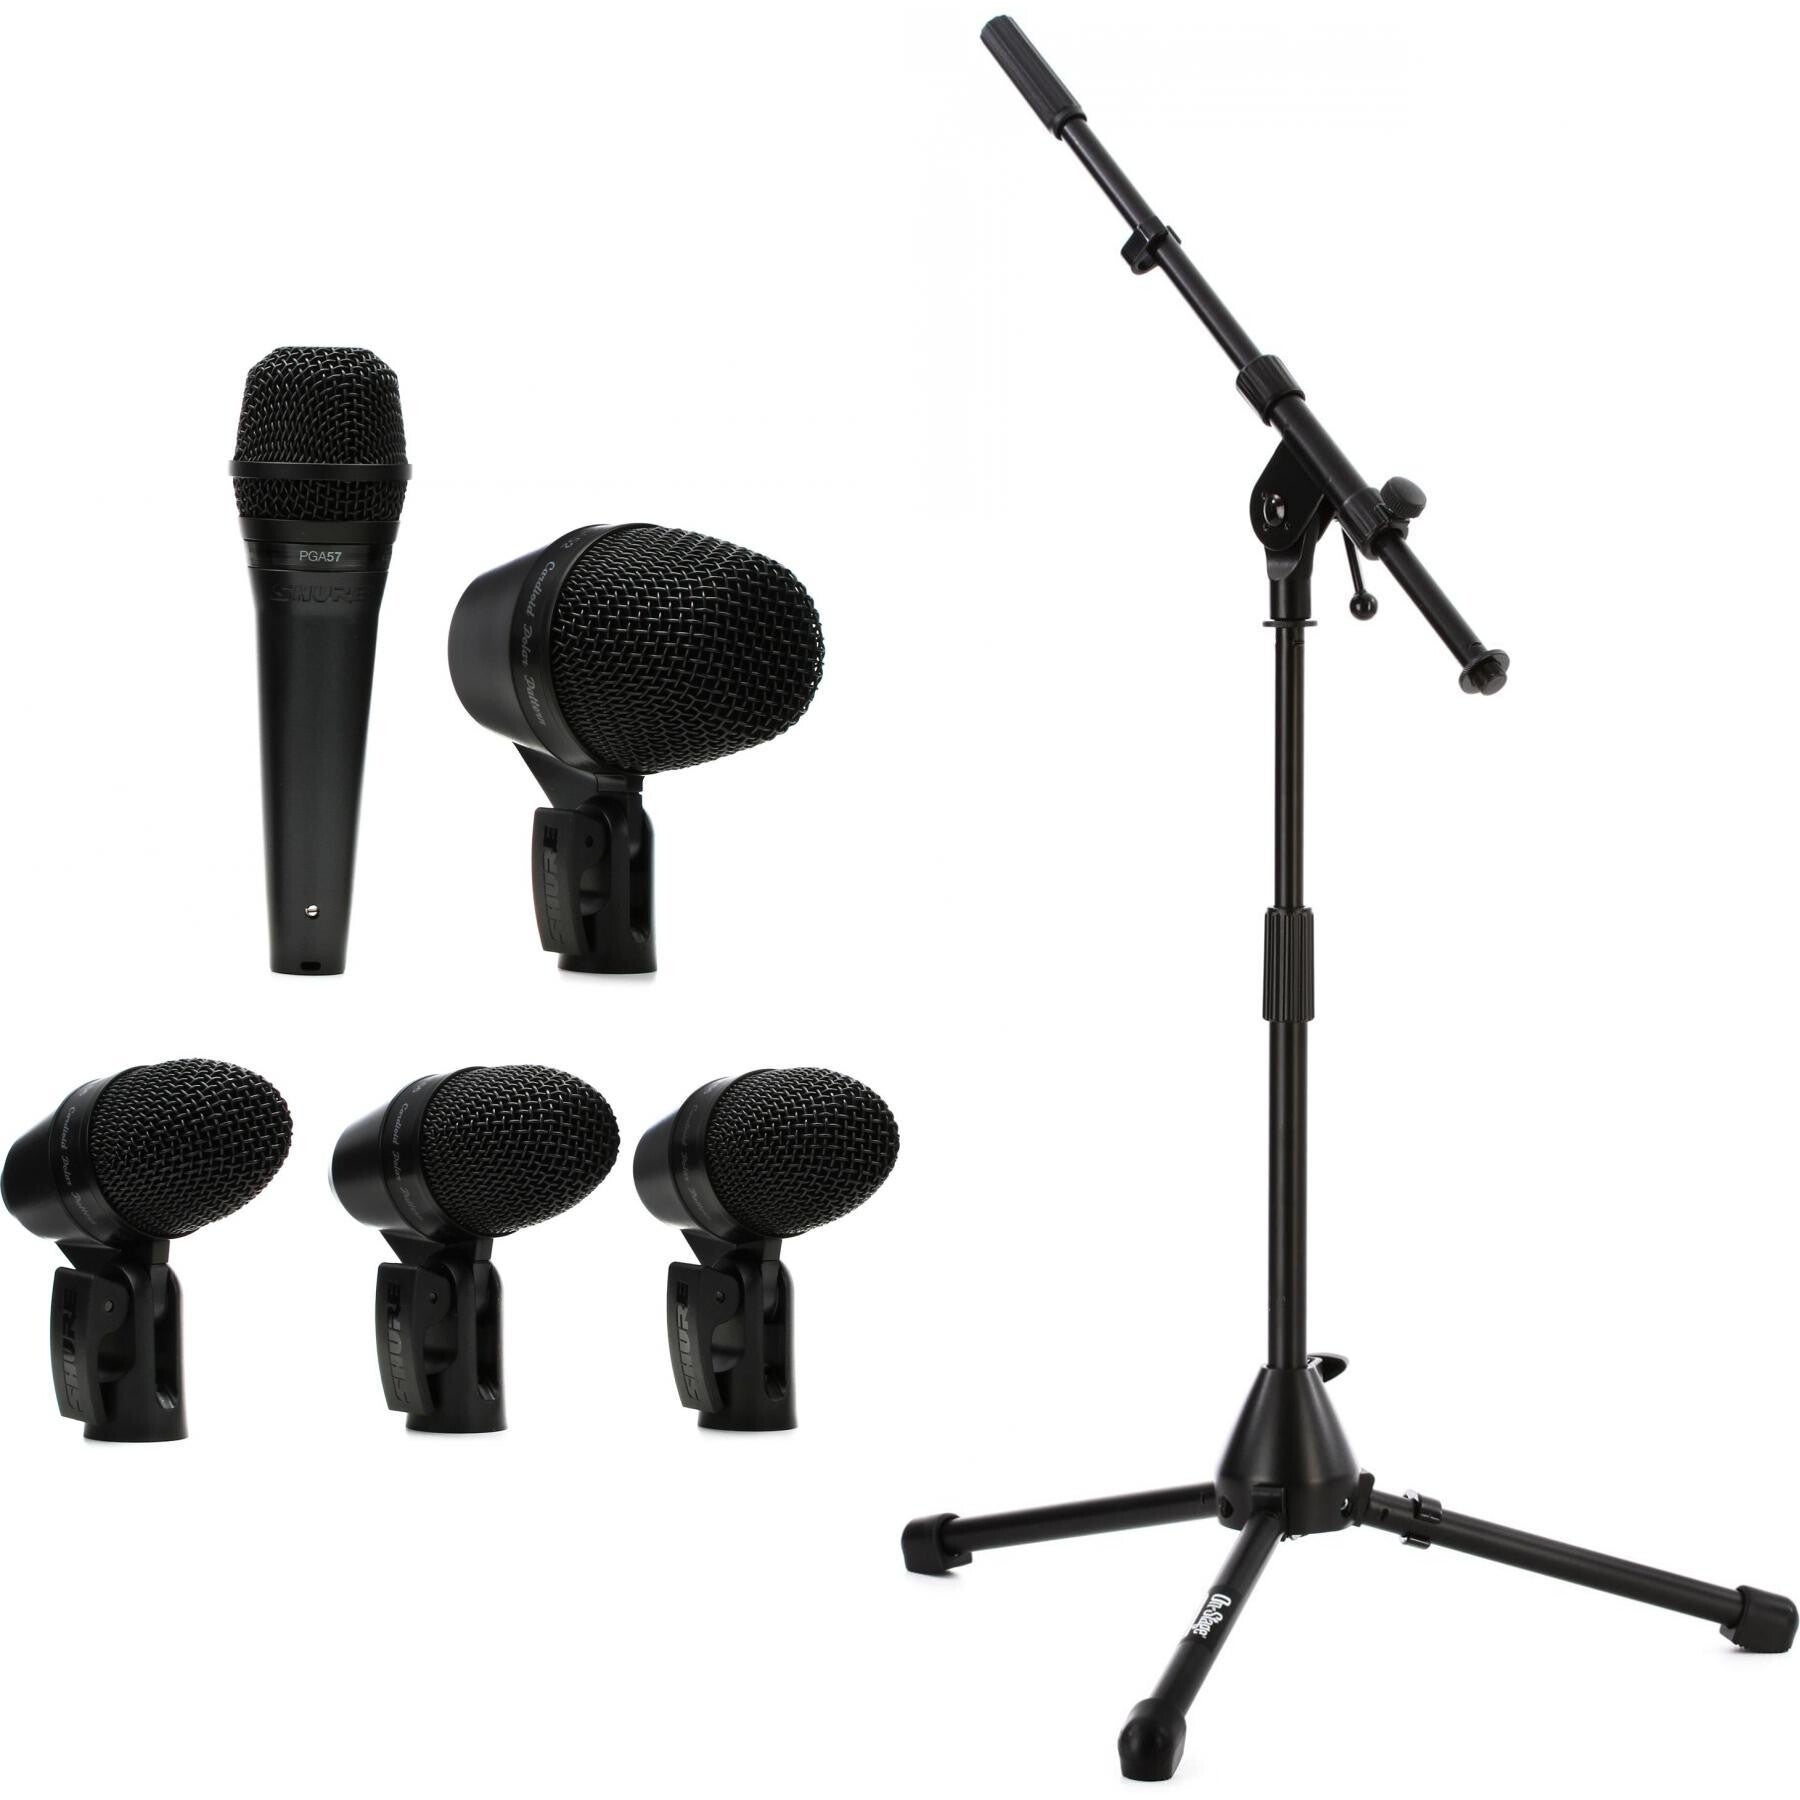 Shure PGADRUMKIT5 5-piece Drum Microphone Bundle with Stands and Cables